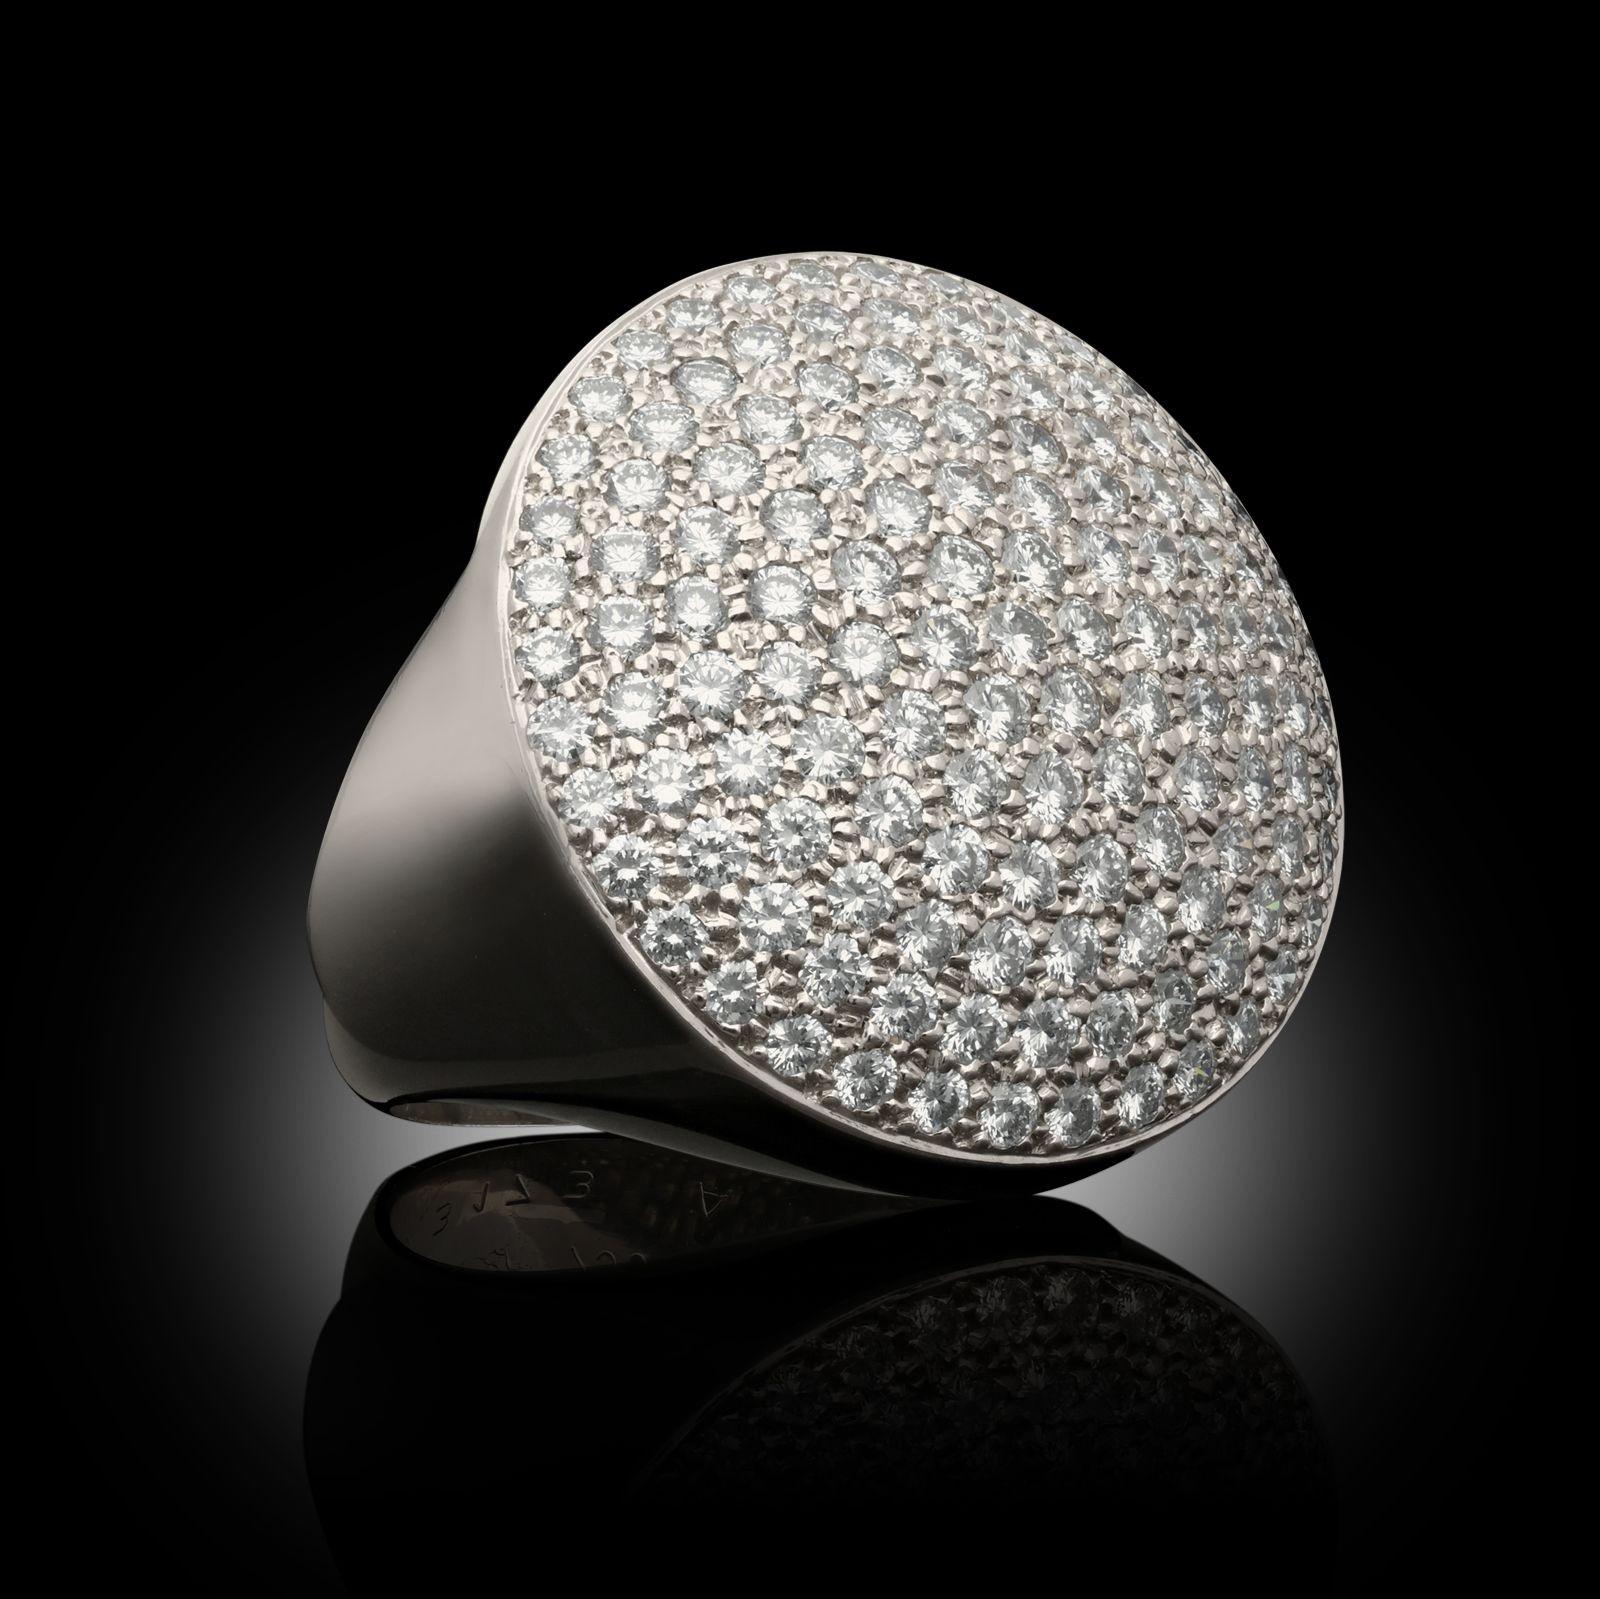 A striking and bold 18ct white gold and diamond cocktail ring by Cartier c.2000s, of large circular form, the gently domed head fully pavé set with round brilliant cut diamonds in 18ct white gold to tapering shoulders and a plain band. This would